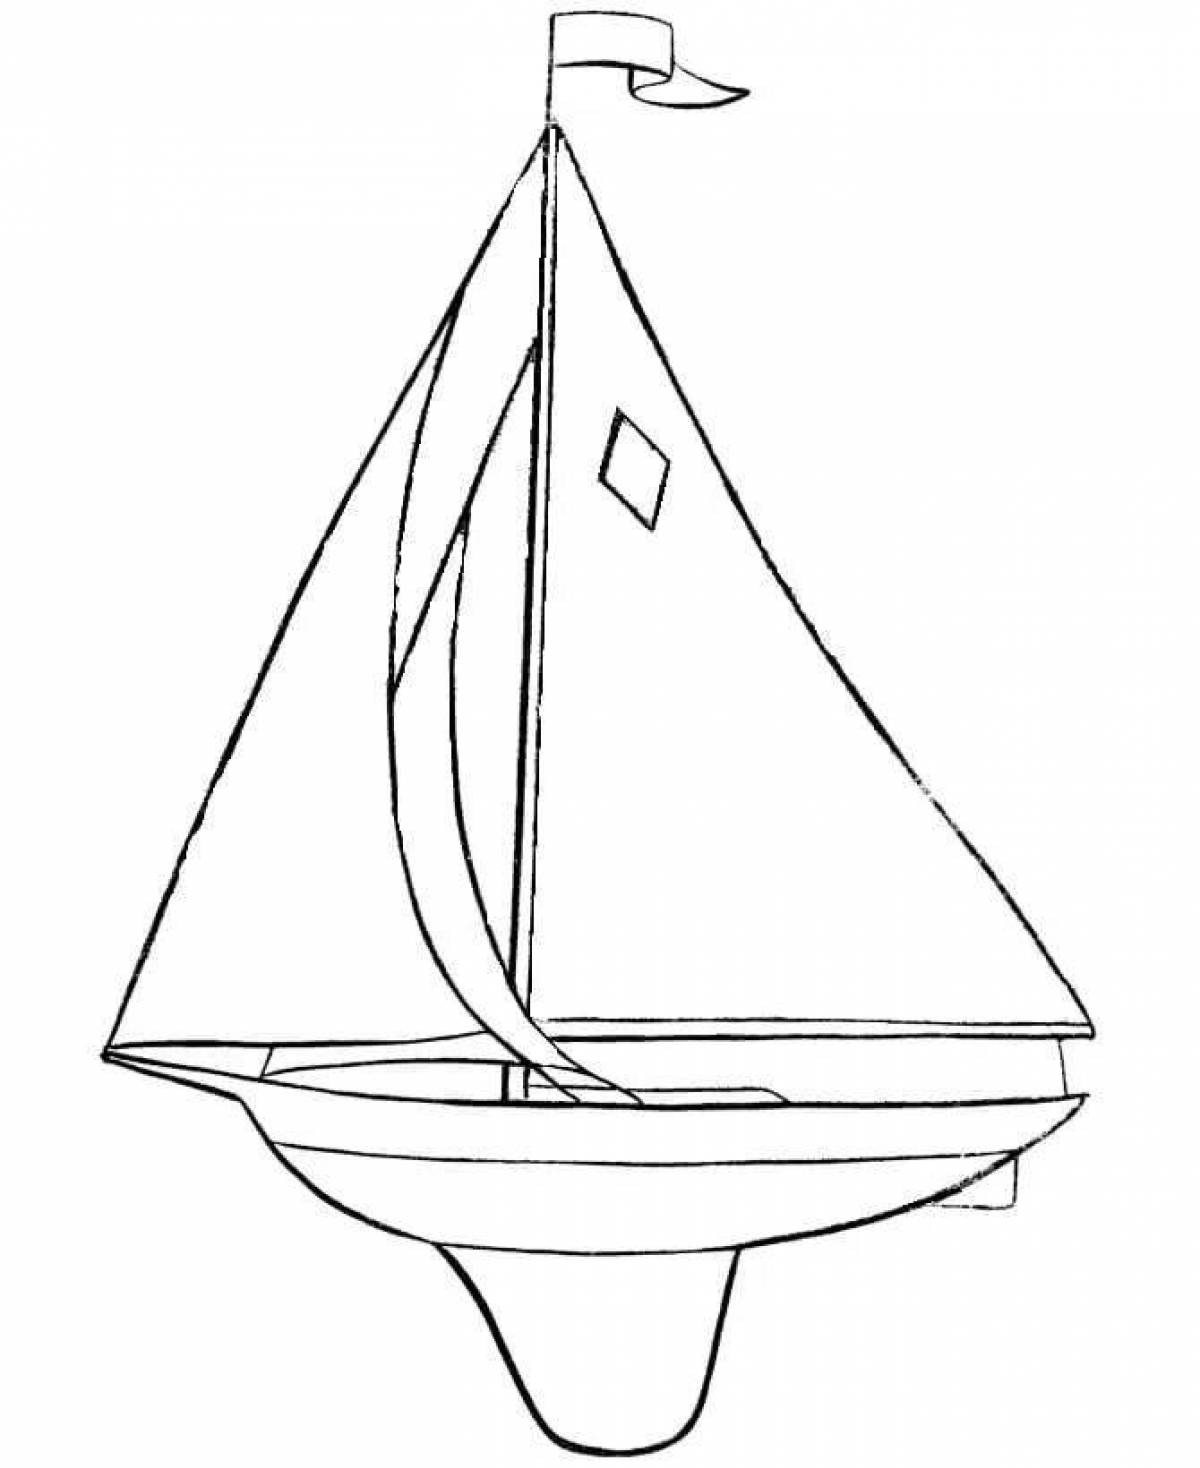 Exciting yacht coloring book for kids